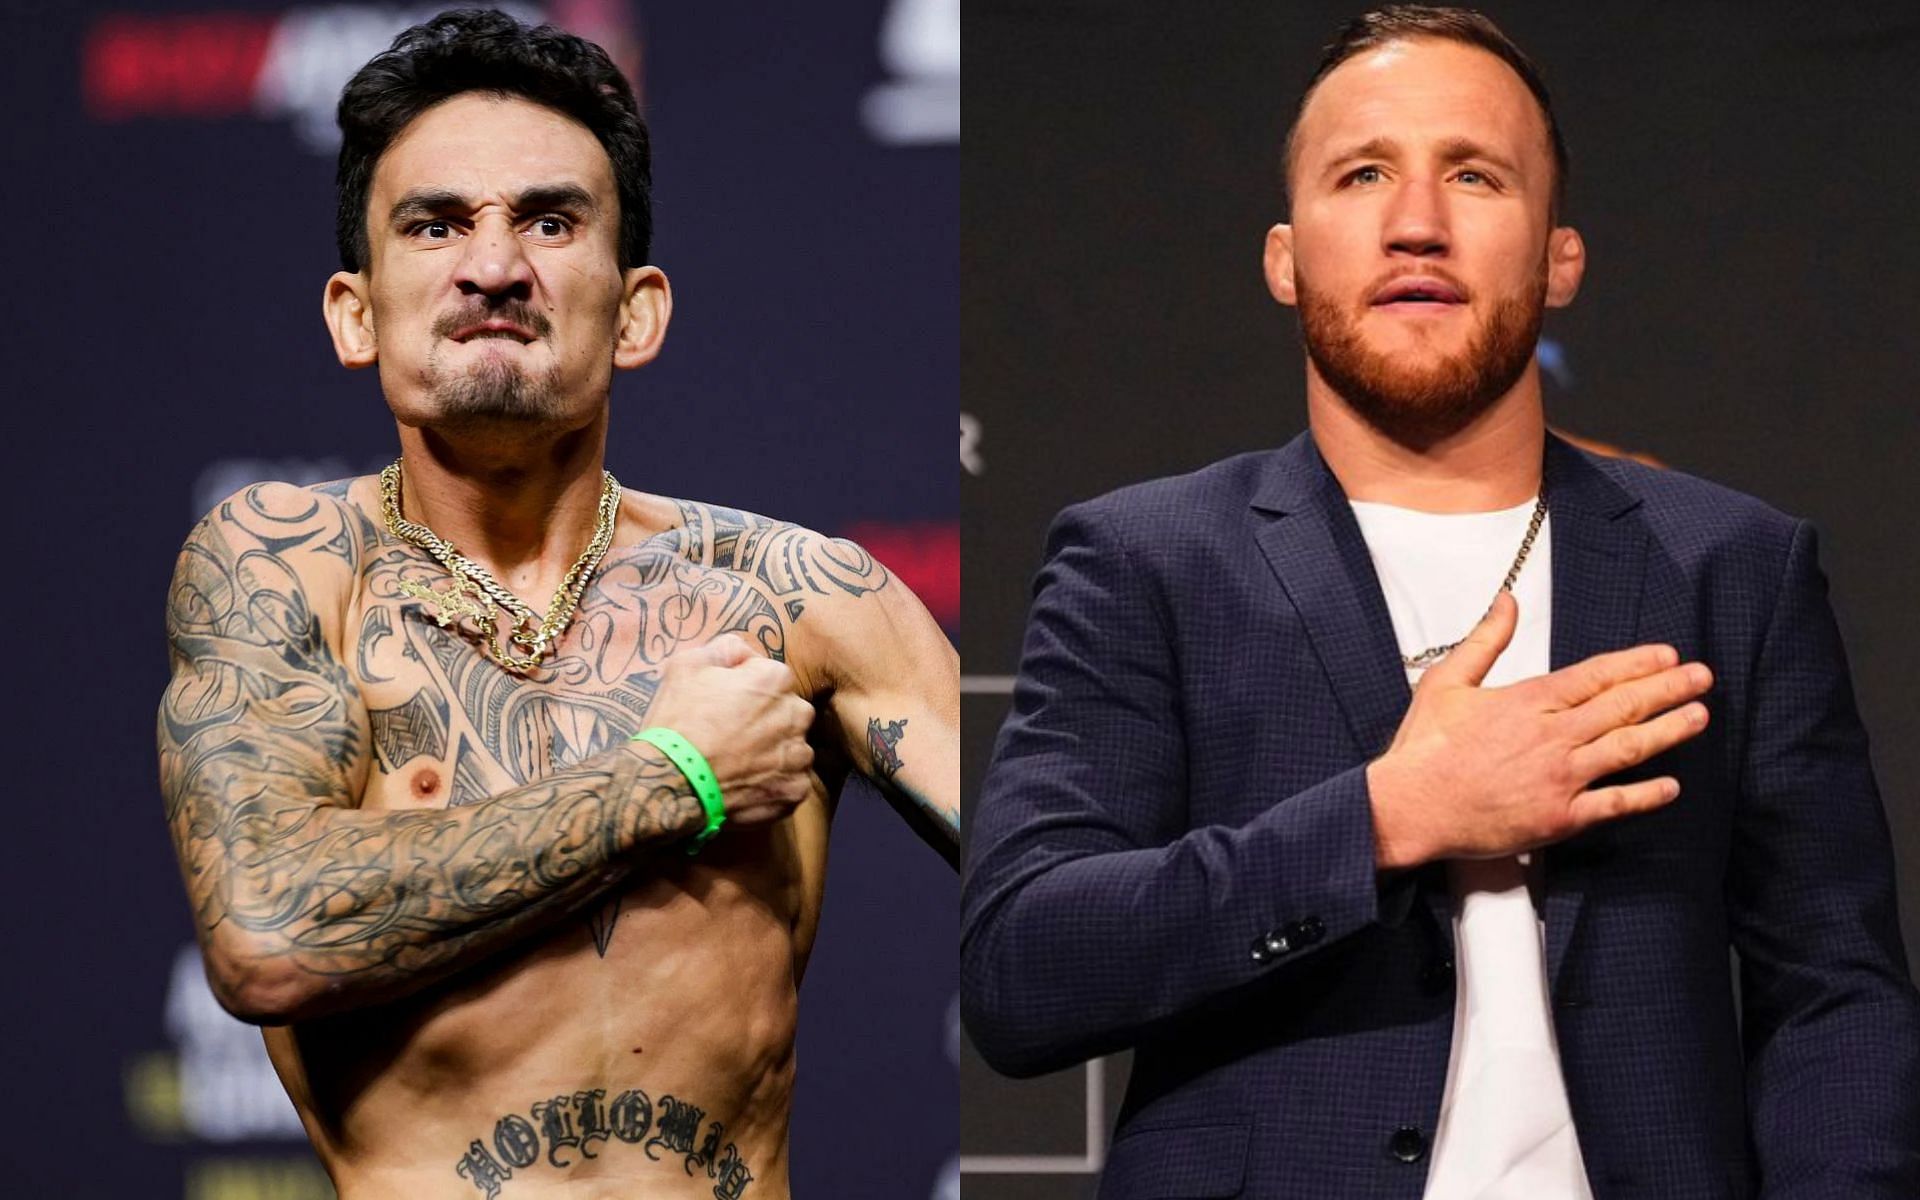 BMF title fight set for UFC 300 between Max Holloway (left) and Justin Gaethje (right) broken down by Michael Bisping [Images Courtesy: @GettyImages and @justin_gaethje]